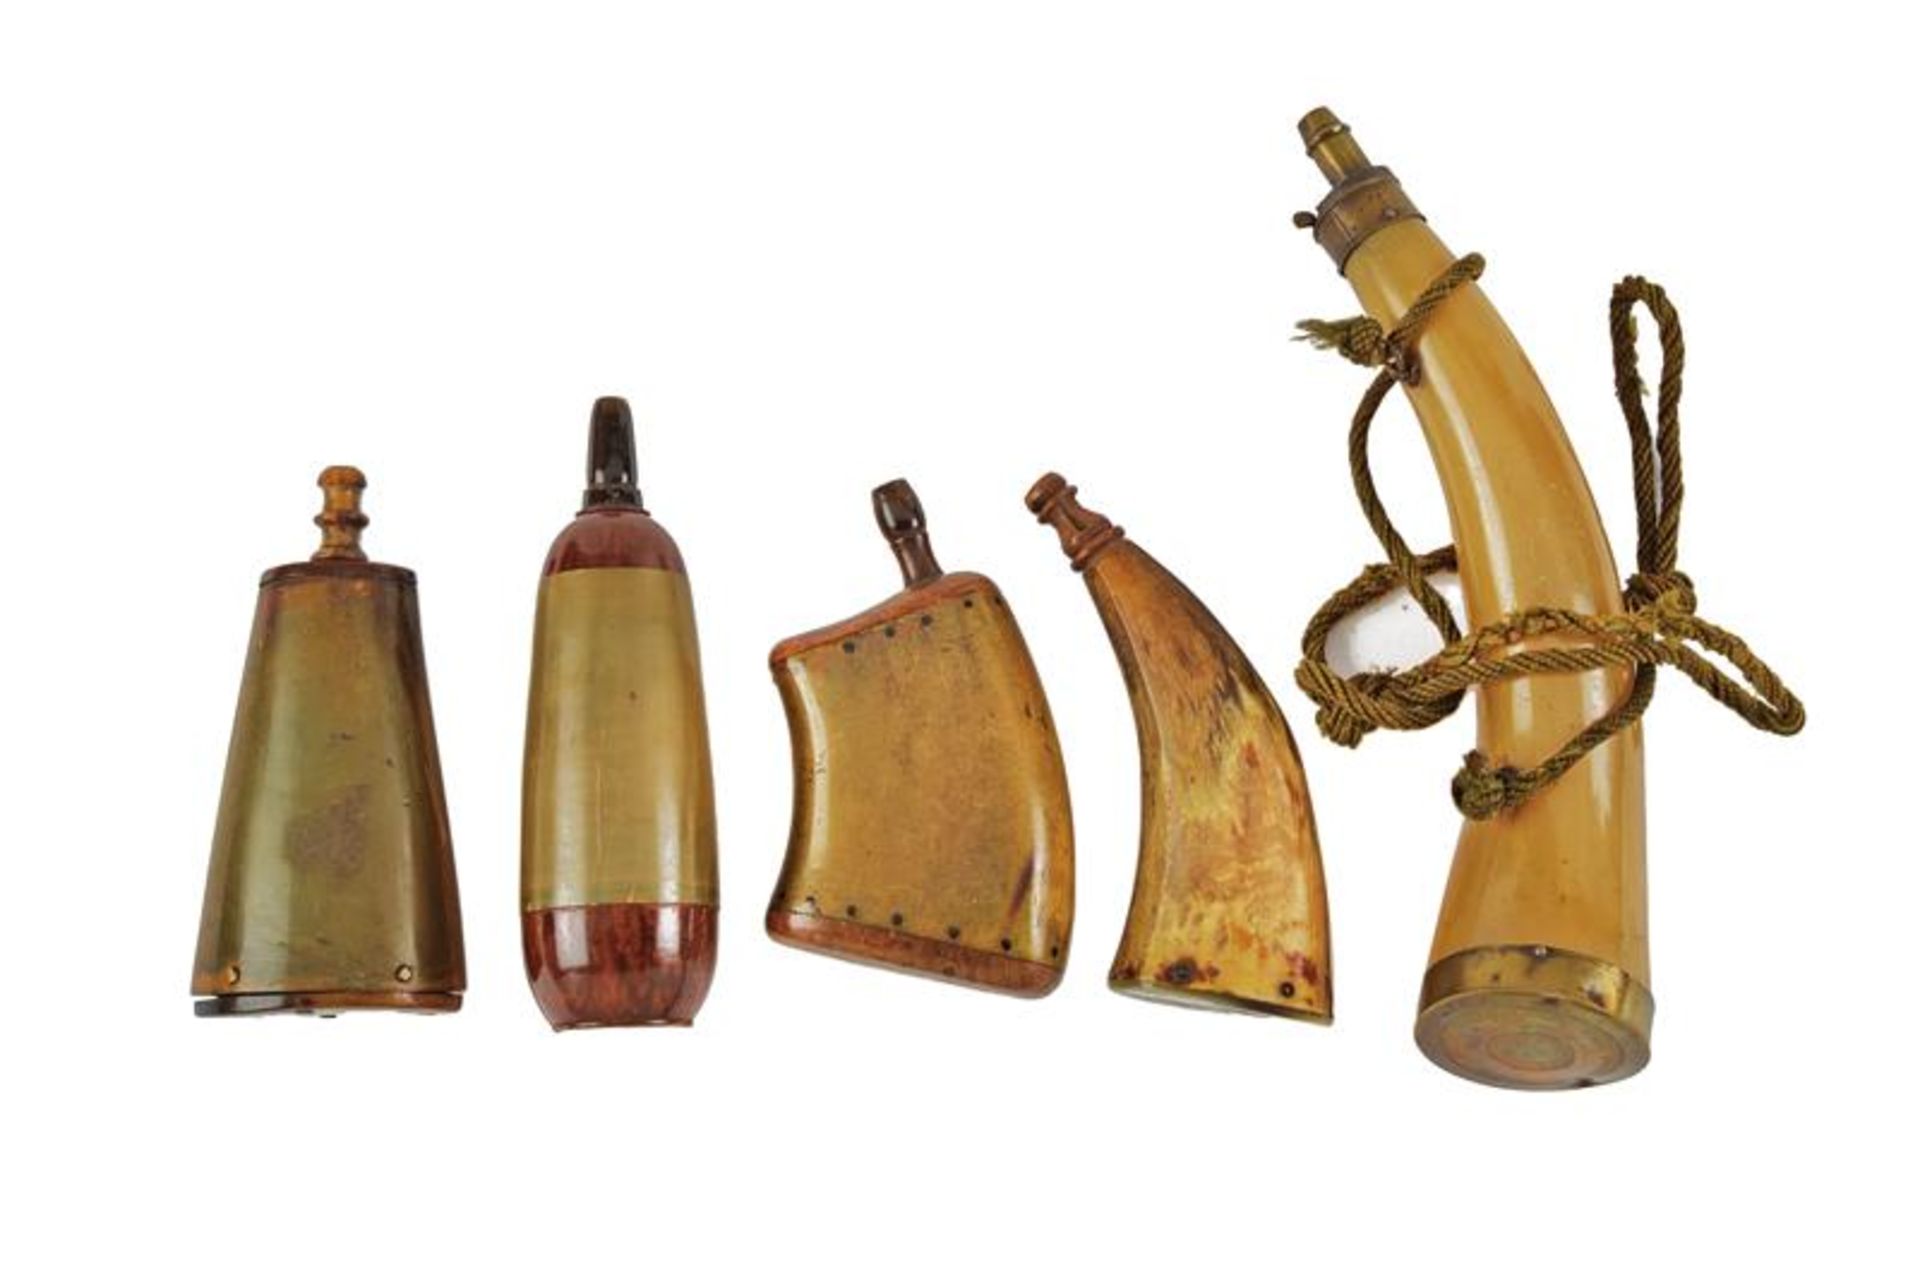 A small collection of five powder flasks in cow horn